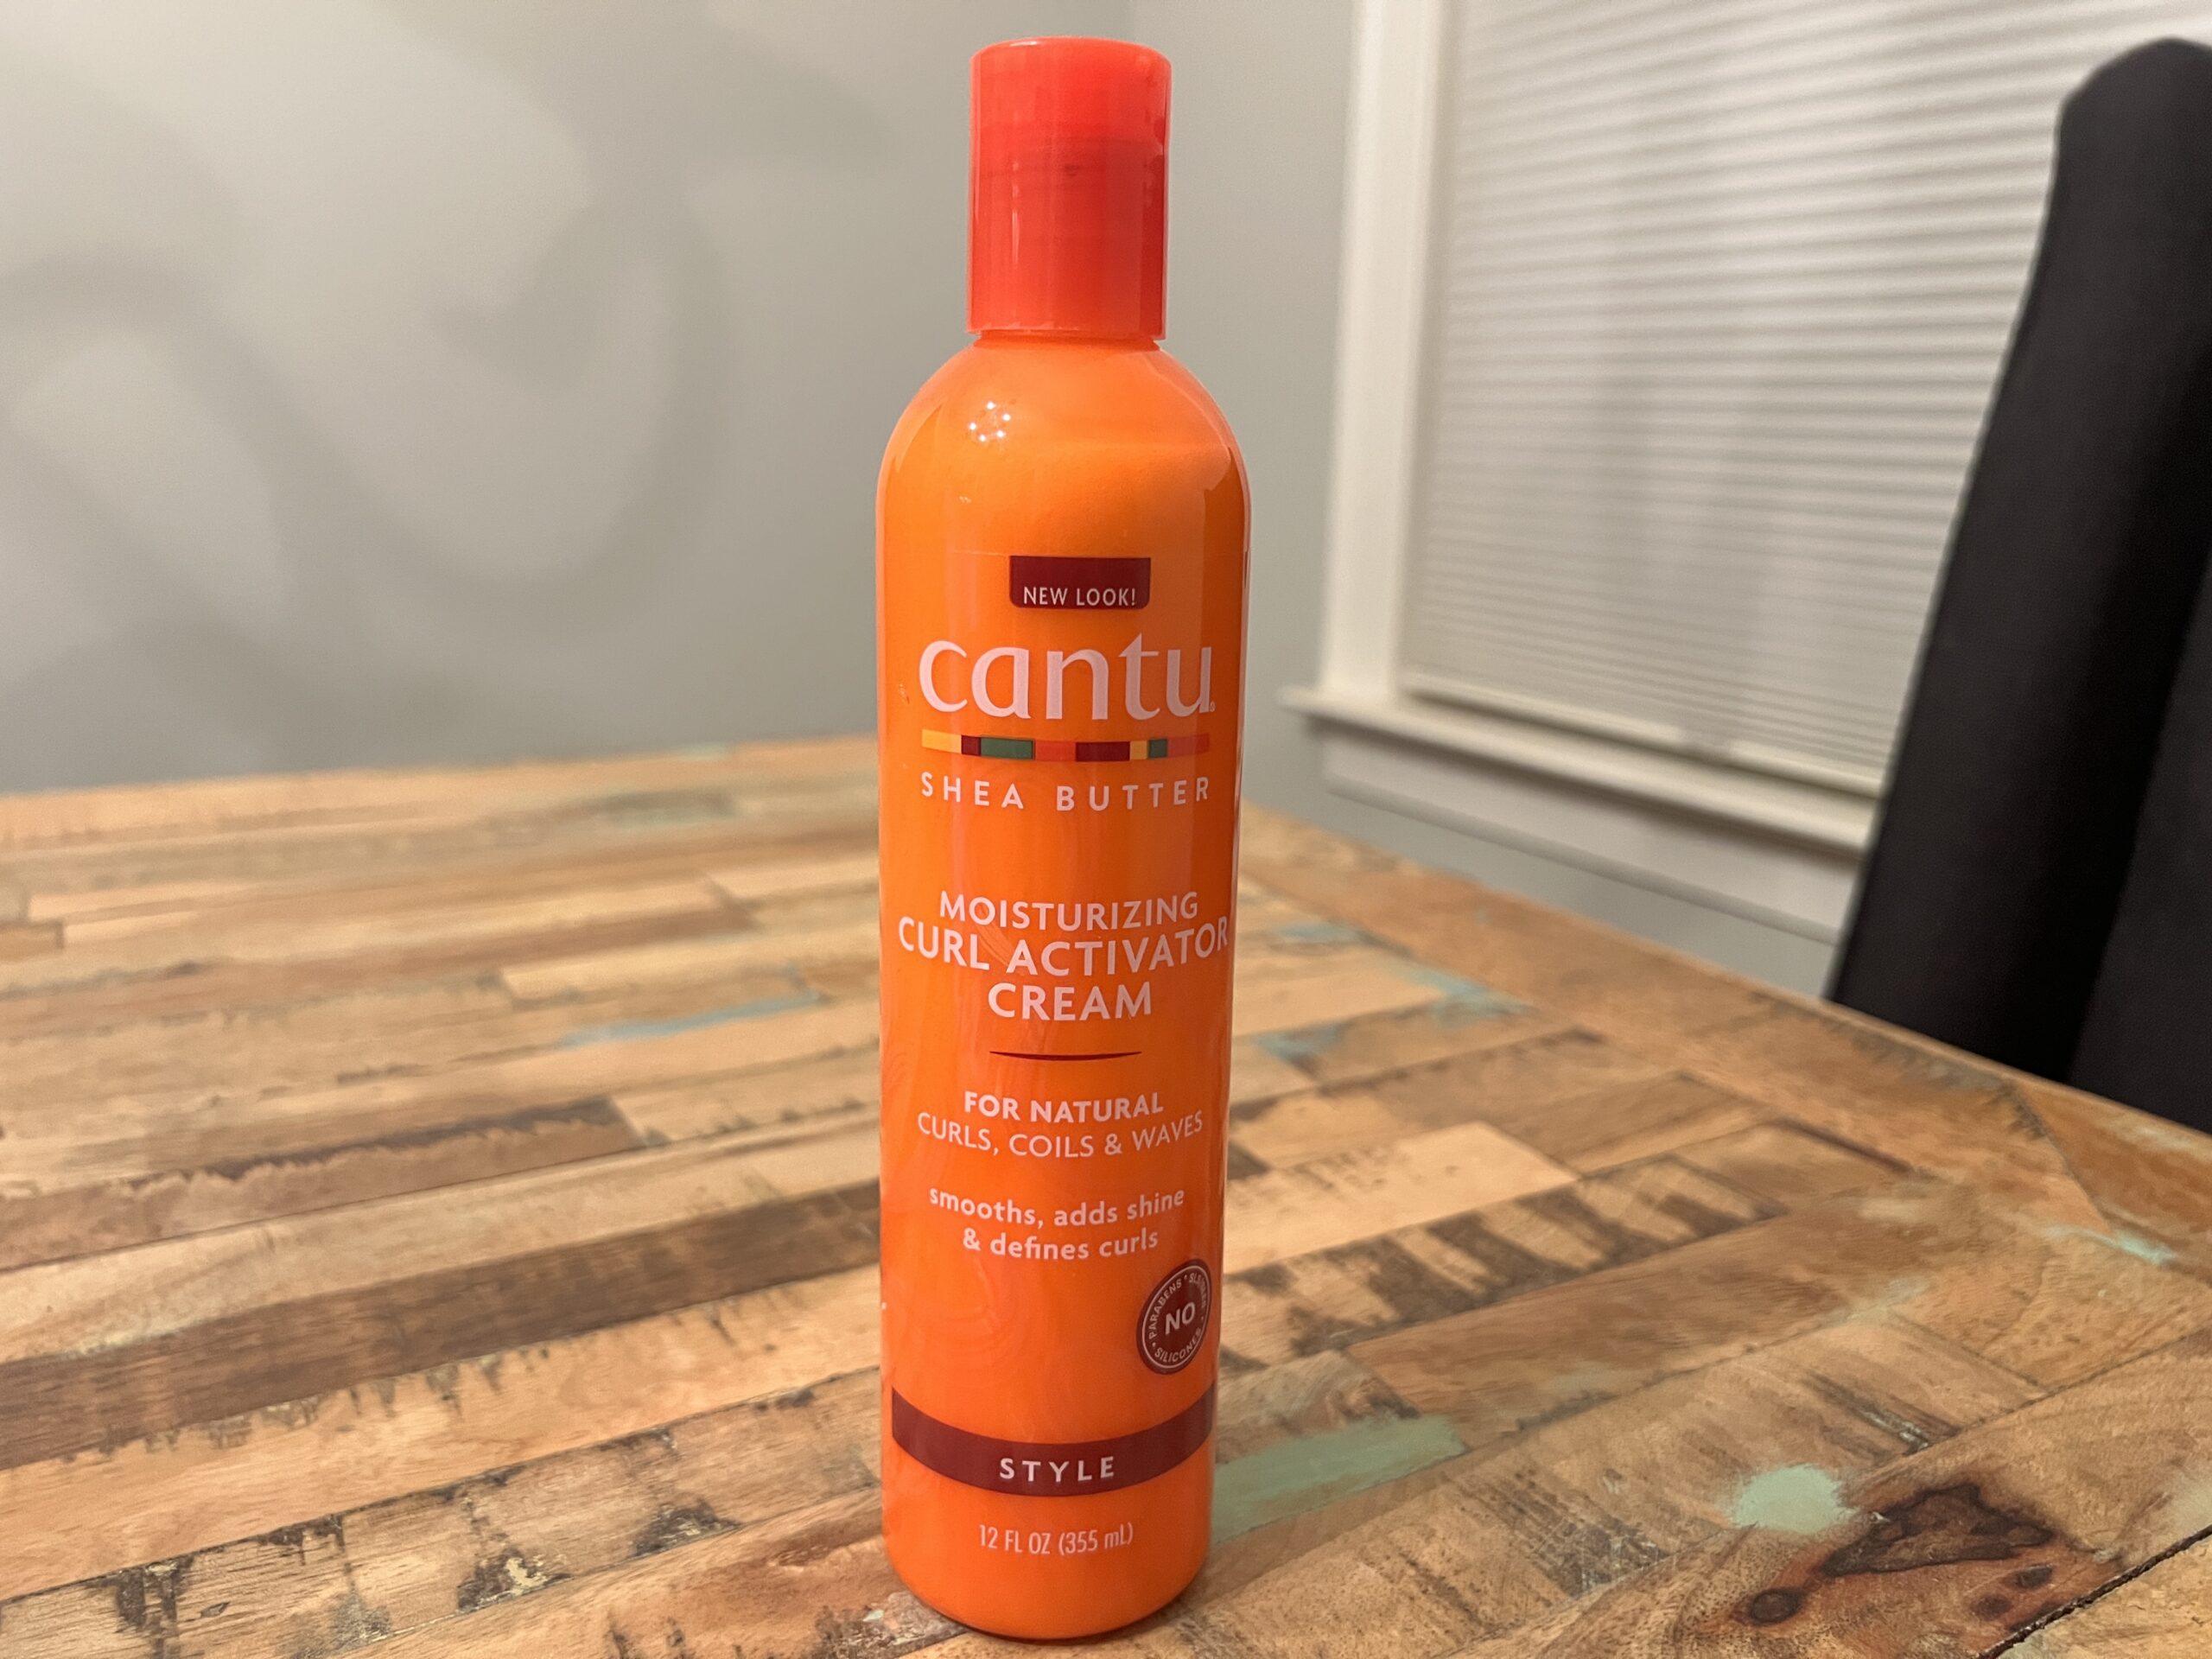 Bottle of Cantu Shea Moisturizing Curl Activator Cream, designed to enhance curl definition and add shine.